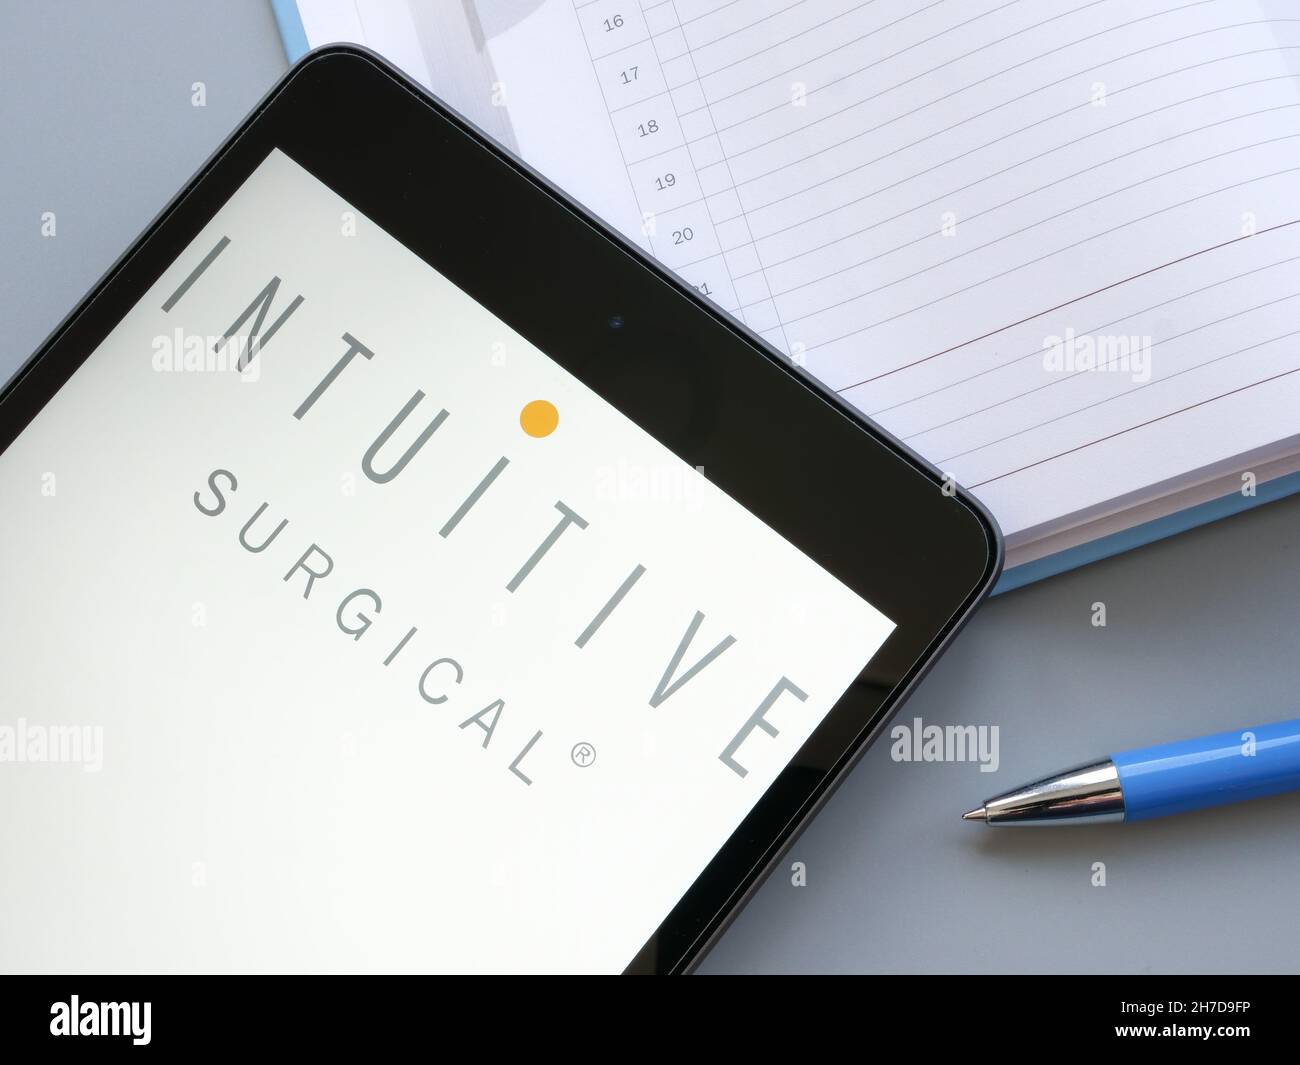 KYIV, UKRAINE - October 21, 2021. Intuitive Surgical Inc logo near pen and notebook. Stock Photo